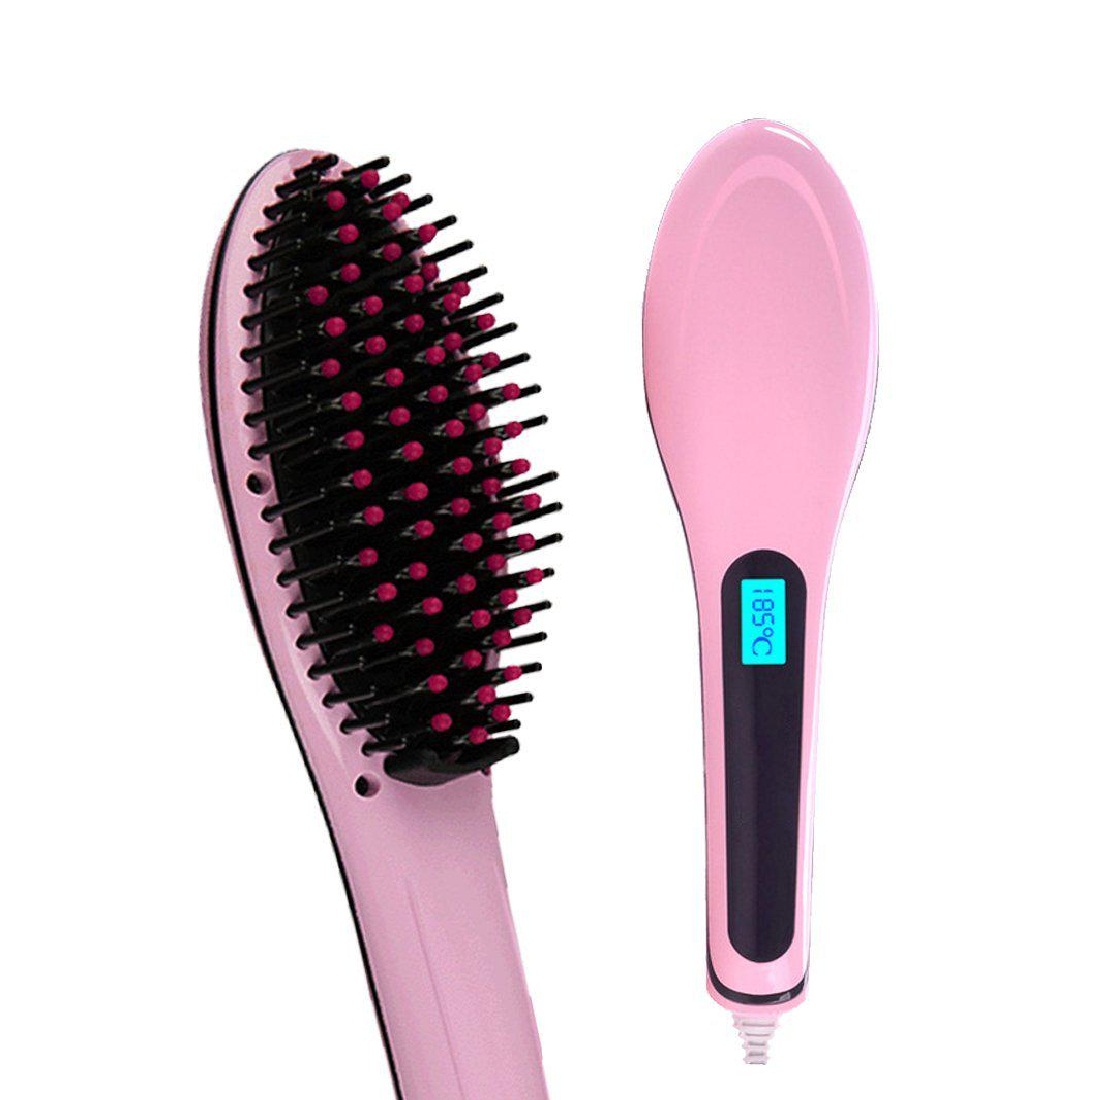 GHK G1 Fast Hair Straightener Massager Brush with Lcd Screen for Temperature, Easy to Use, Portable & Compact